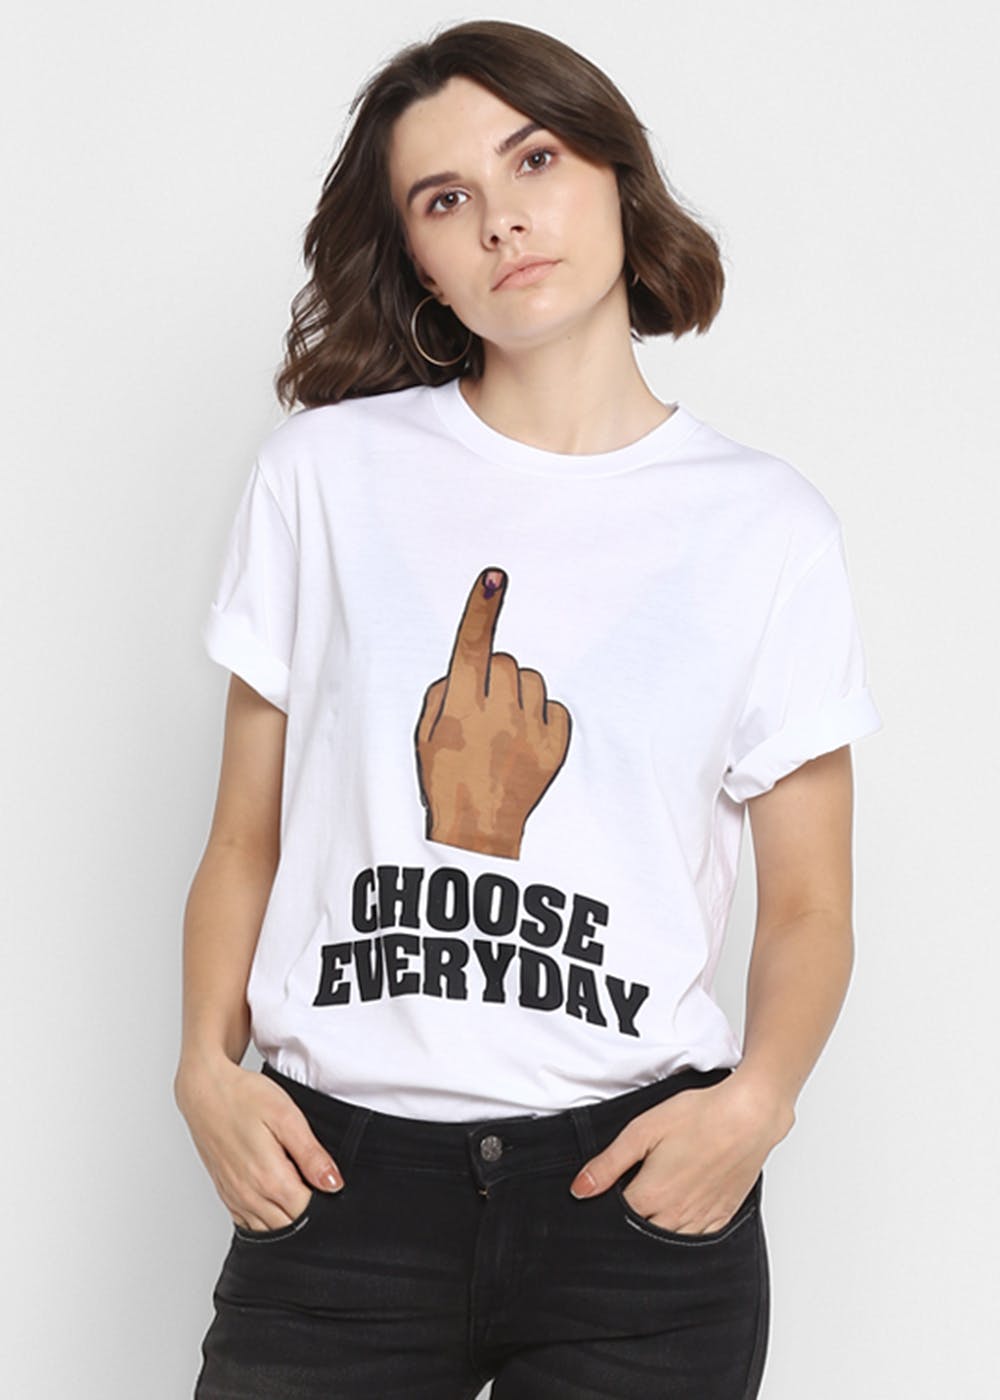 "Choose Everyday" Graphic White T-Shirt